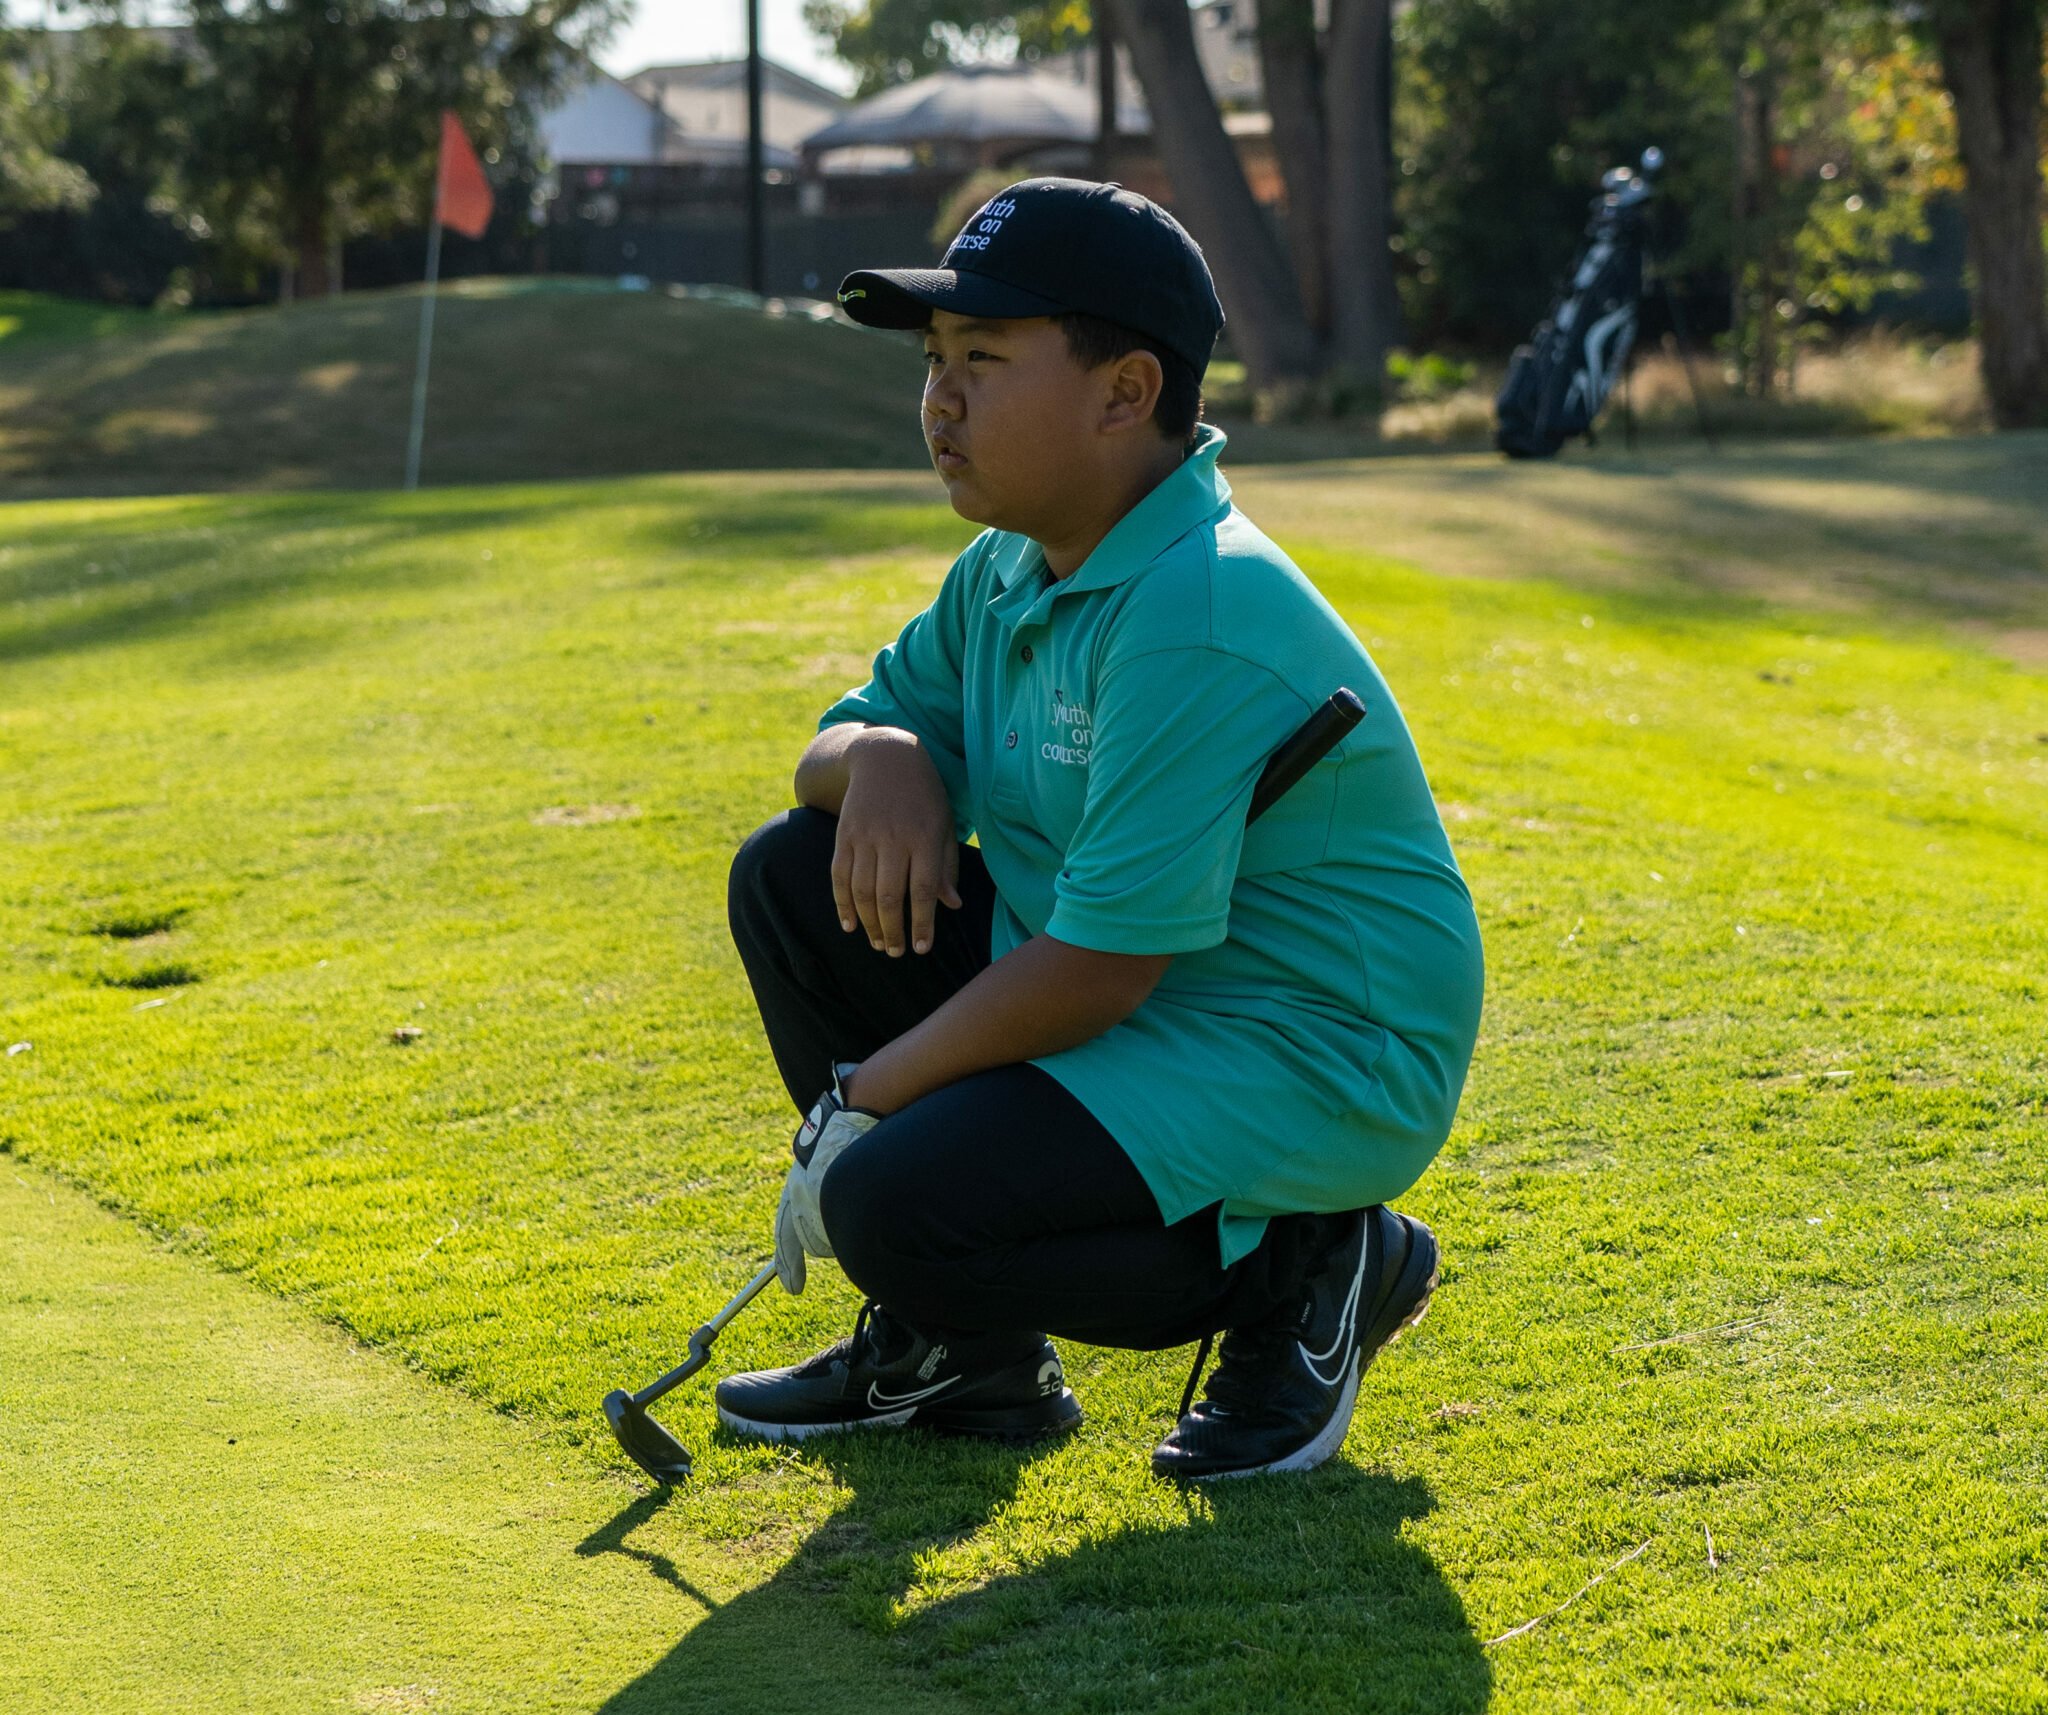 Youth on Course member analyzing the green and preparing to putt